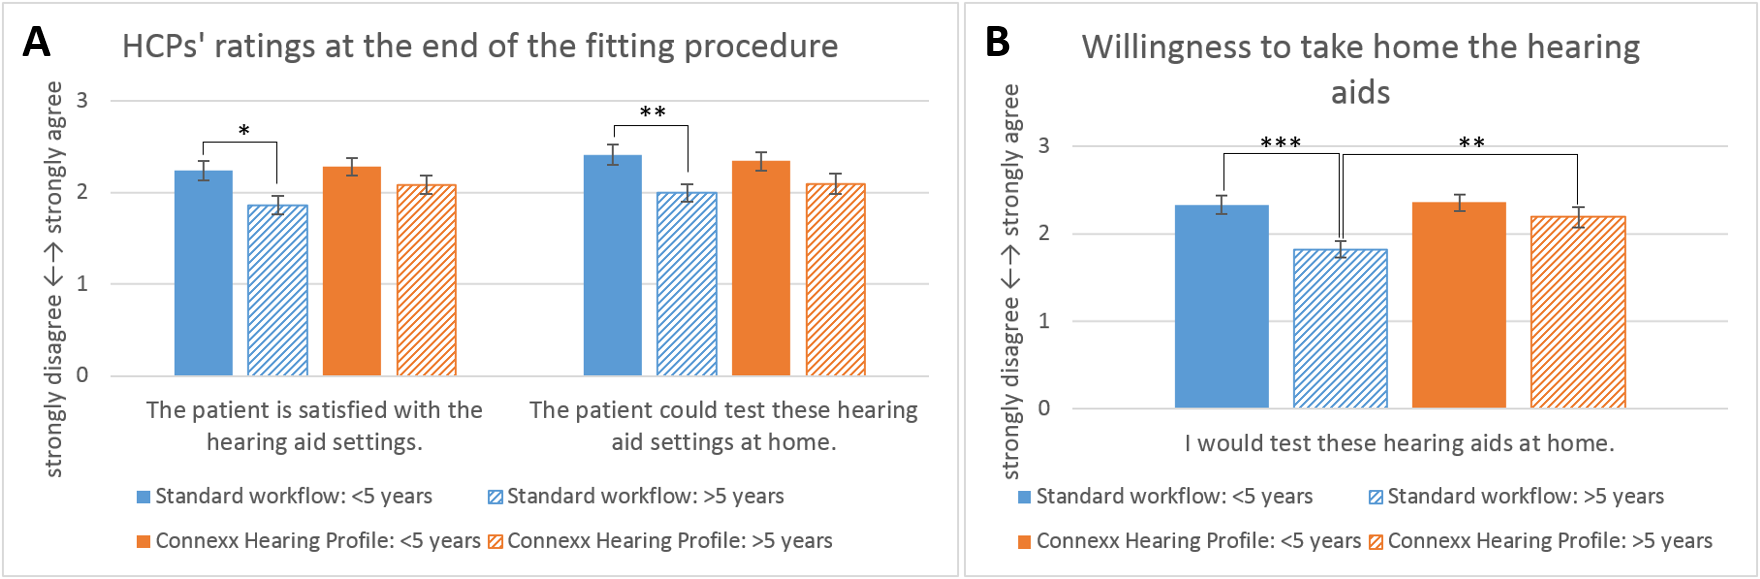 HCPs' and patients' ratings of both fitting workflows depending on the patient’s hearing aid experience